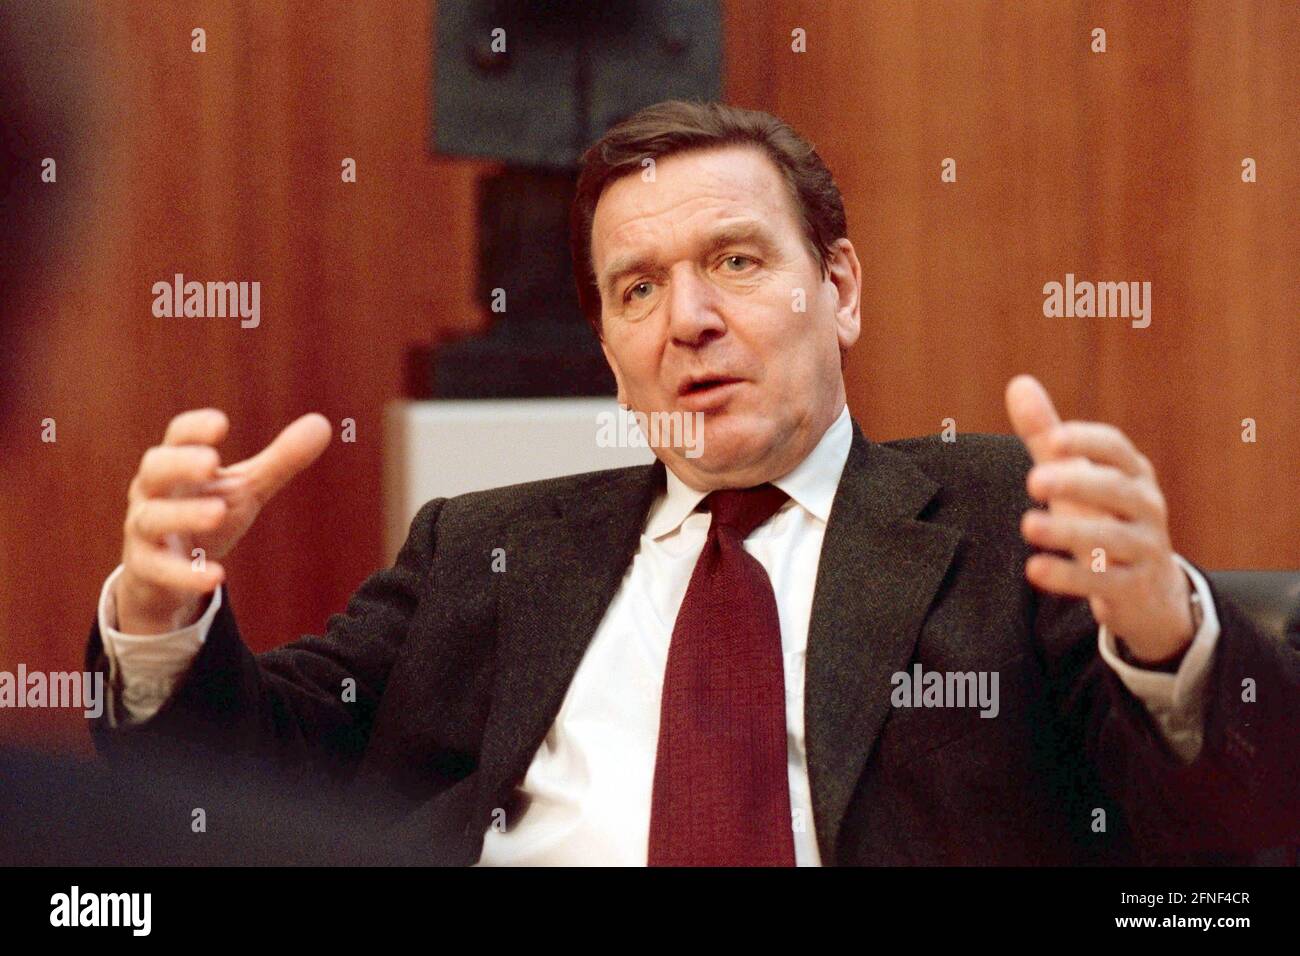 Portrait of German Chancellor Gerhard Schröder (SPD) during an interview in his office. [automated translation] Stock Photo